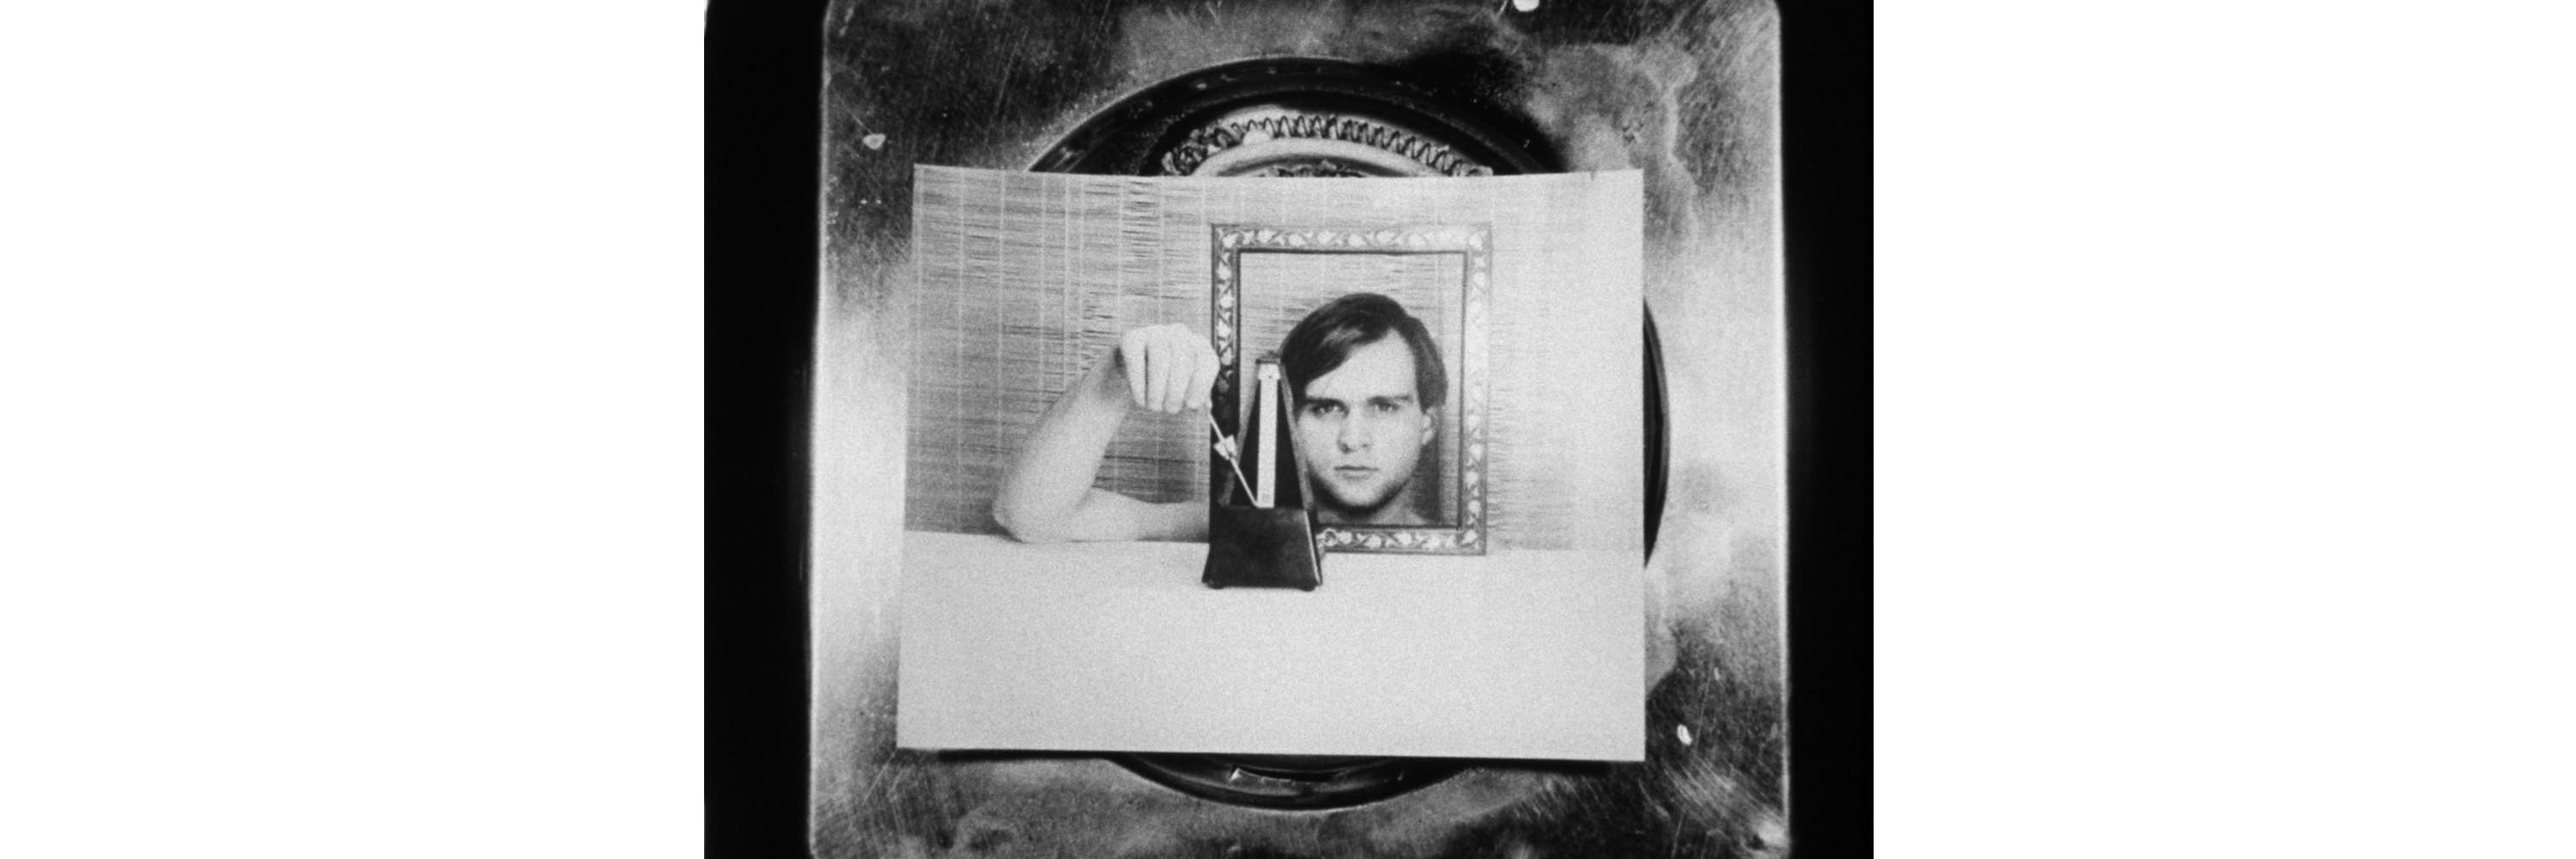 Film still showing photograph of a man's face and arm. The photograph sits on a stove burner